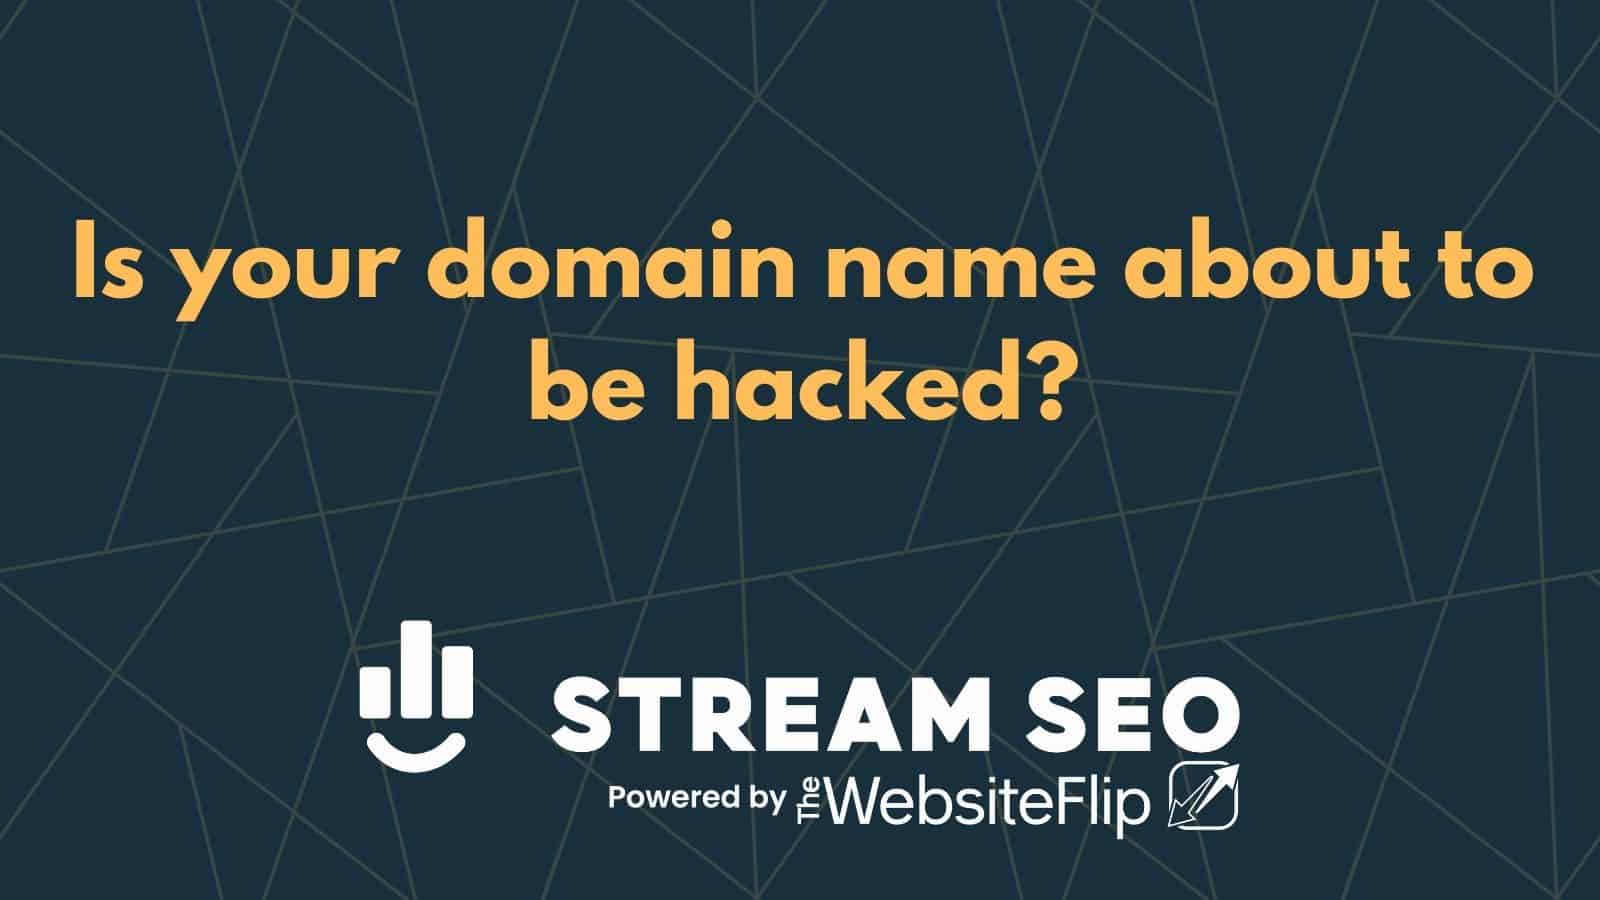 Is your domain name about to be hacked?